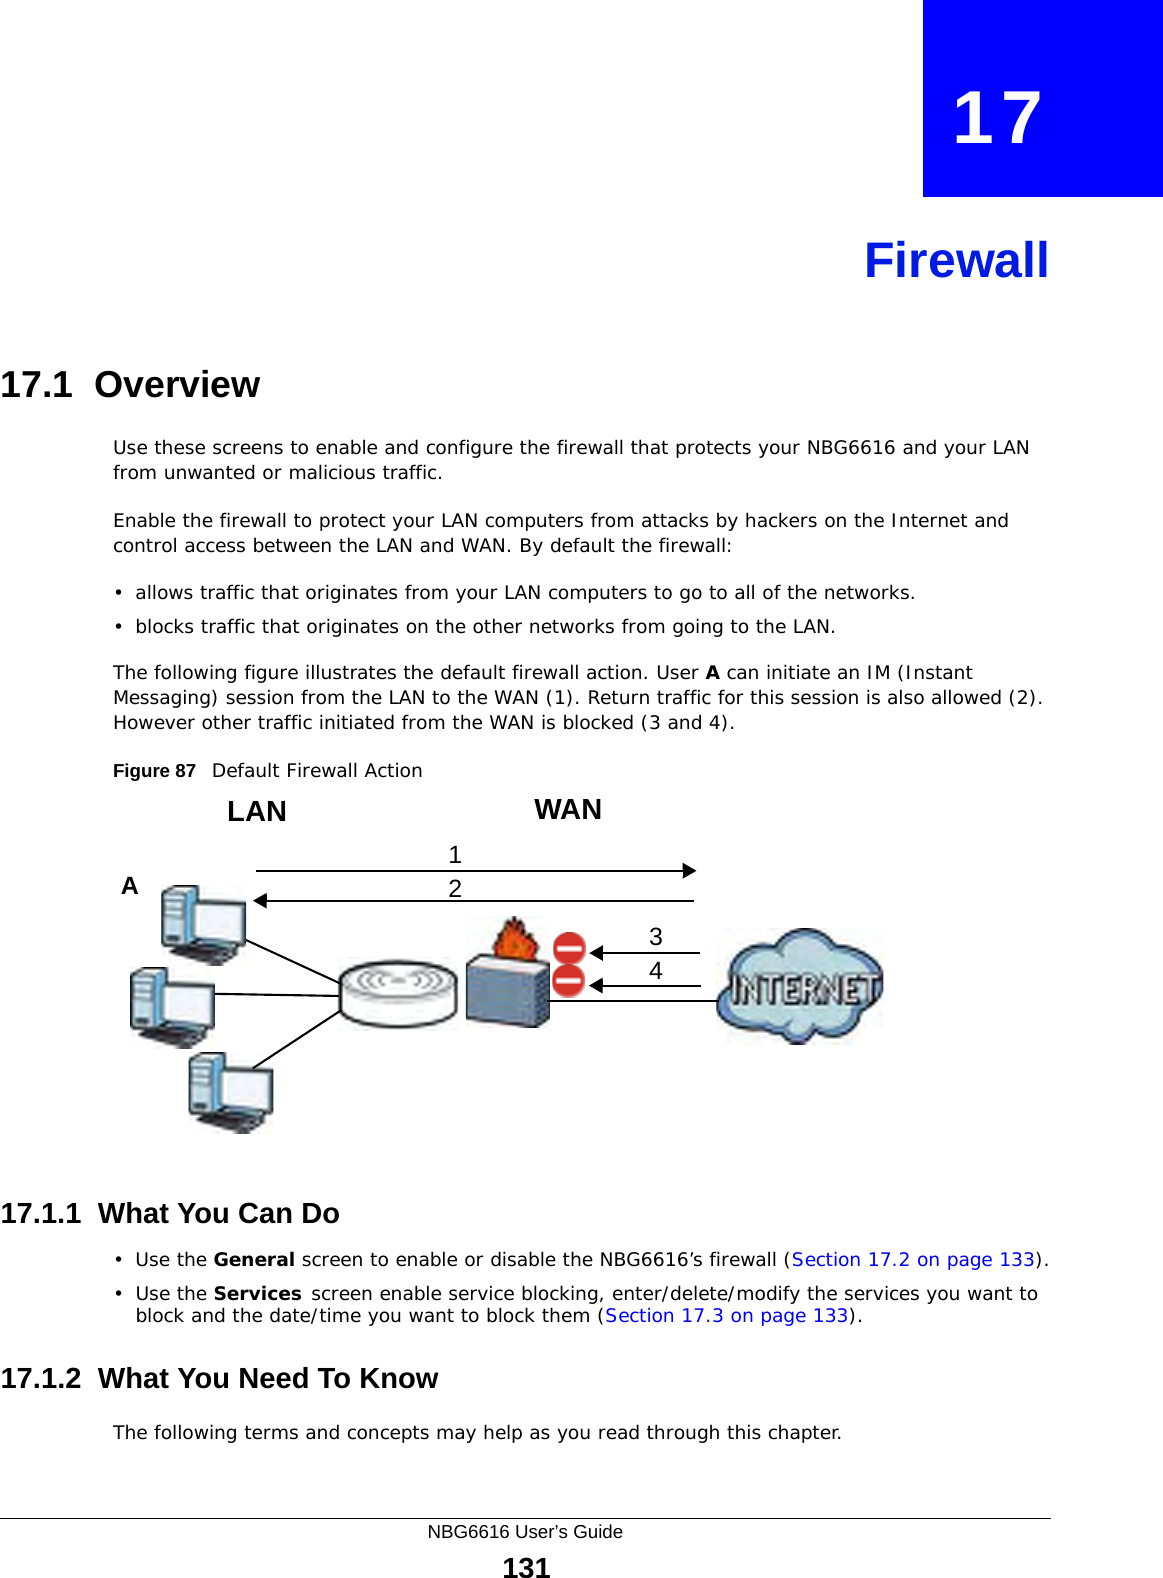 NBG6616 User’s Guide131CHAPTER   17Firewall17.1  Overview   Use these screens to enable and configure the firewall that protects your NBG6616 and your LAN from unwanted or malicious traffic.Enable the firewall to protect your LAN computers from attacks by hackers on the Internet and control access between the LAN and WAN. By default the firewall:• allows traffic that originates from your LAN computers to go to all of the networks. • blocks traffic that originates on the other networks from going to the LAN. The following figure illustrates the default firewall action. User A can initiate an IM (Instant Messaging) session from the LAN to the WAN (1). Return traffic for this session is also allowed (2). However other traffic initiated from the WAN is blocked (3 and 4).Figure 87   Default Firewall Action17.1.1  What You Can Do•Use the General screen to enable or disable the NBG6616’s firewall (Section 17.2 on page 133).•Use the Services screen enable service blocking, enter/delete/modify the services you want to block and the date/time you want to block them (Section 17.3 on page 133).17.1.2  What You Need To KnowThe following terms and concepts may help as you read through this chapter.WANLAN3412A